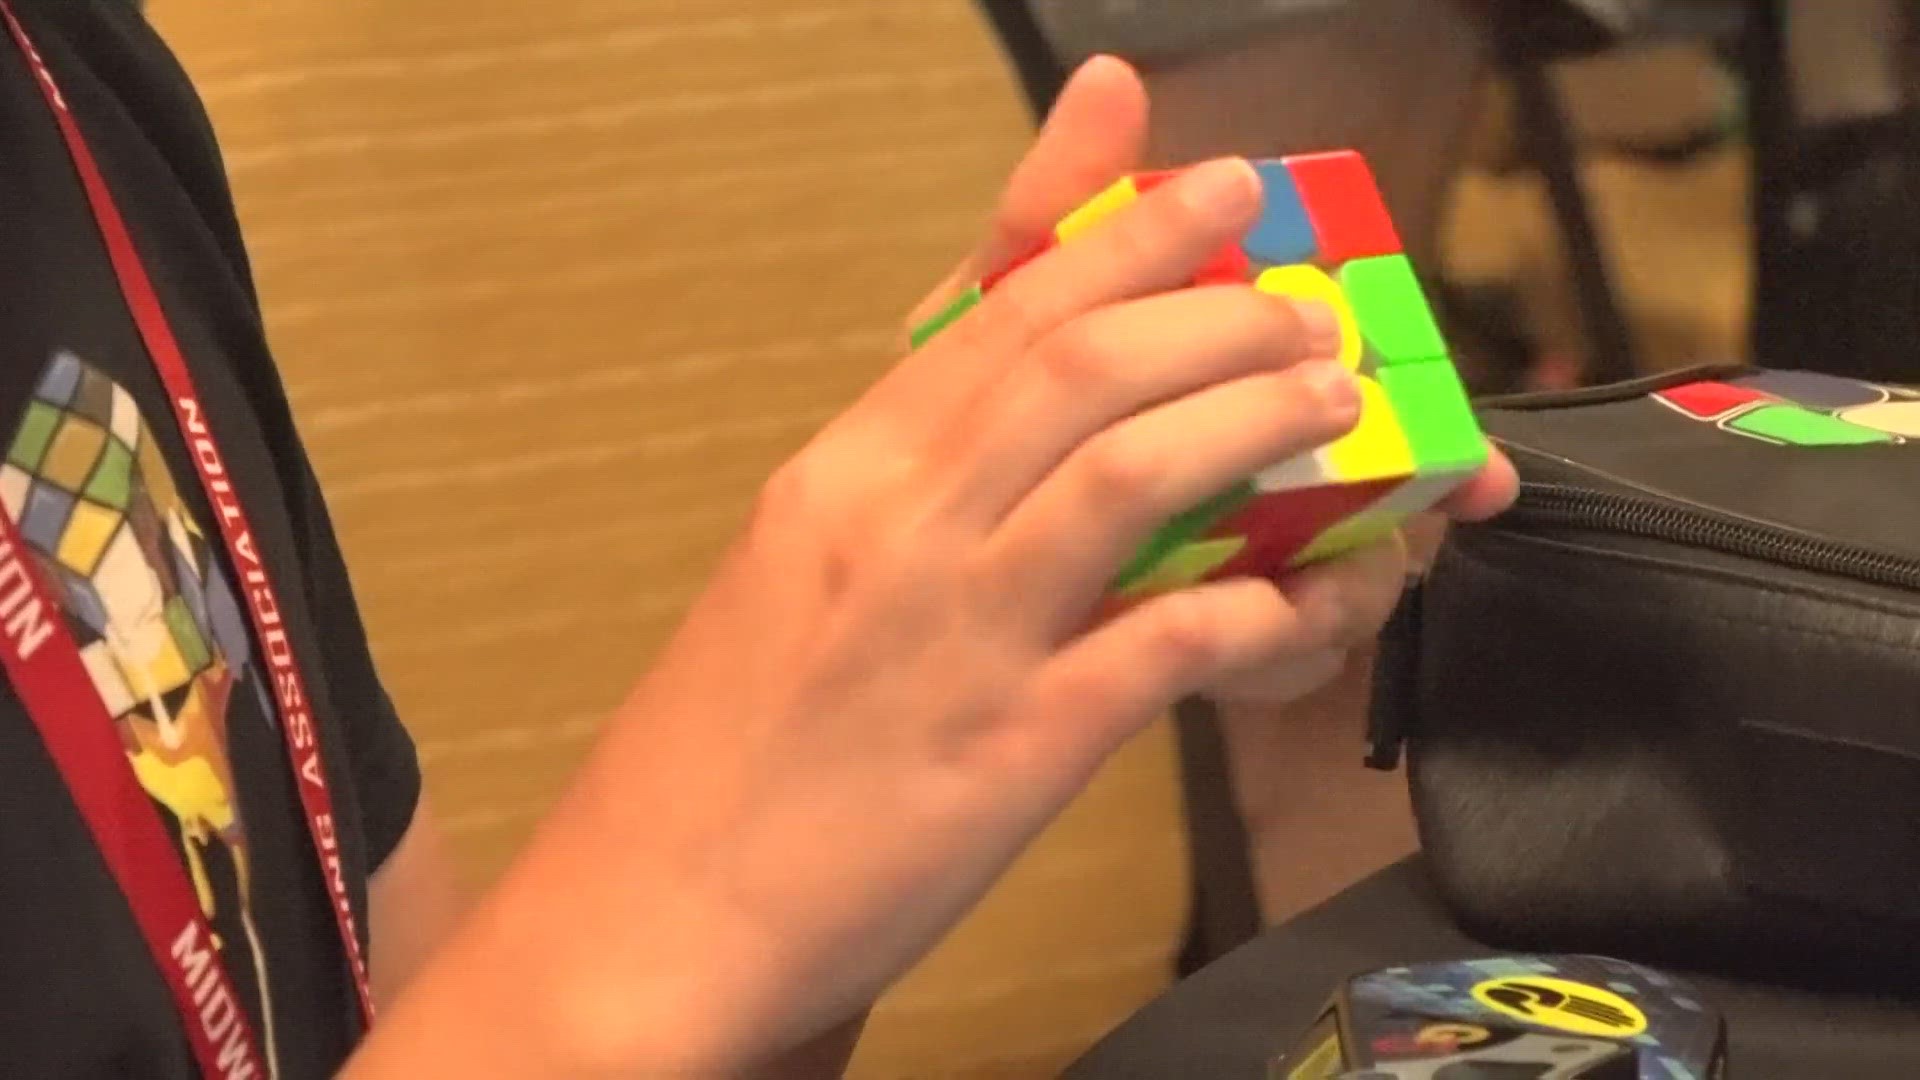 About 165 kids from a dozen states traveled to Independence, Missouri for the Cubing USA Heartland Championship. A world record was broken at the event.